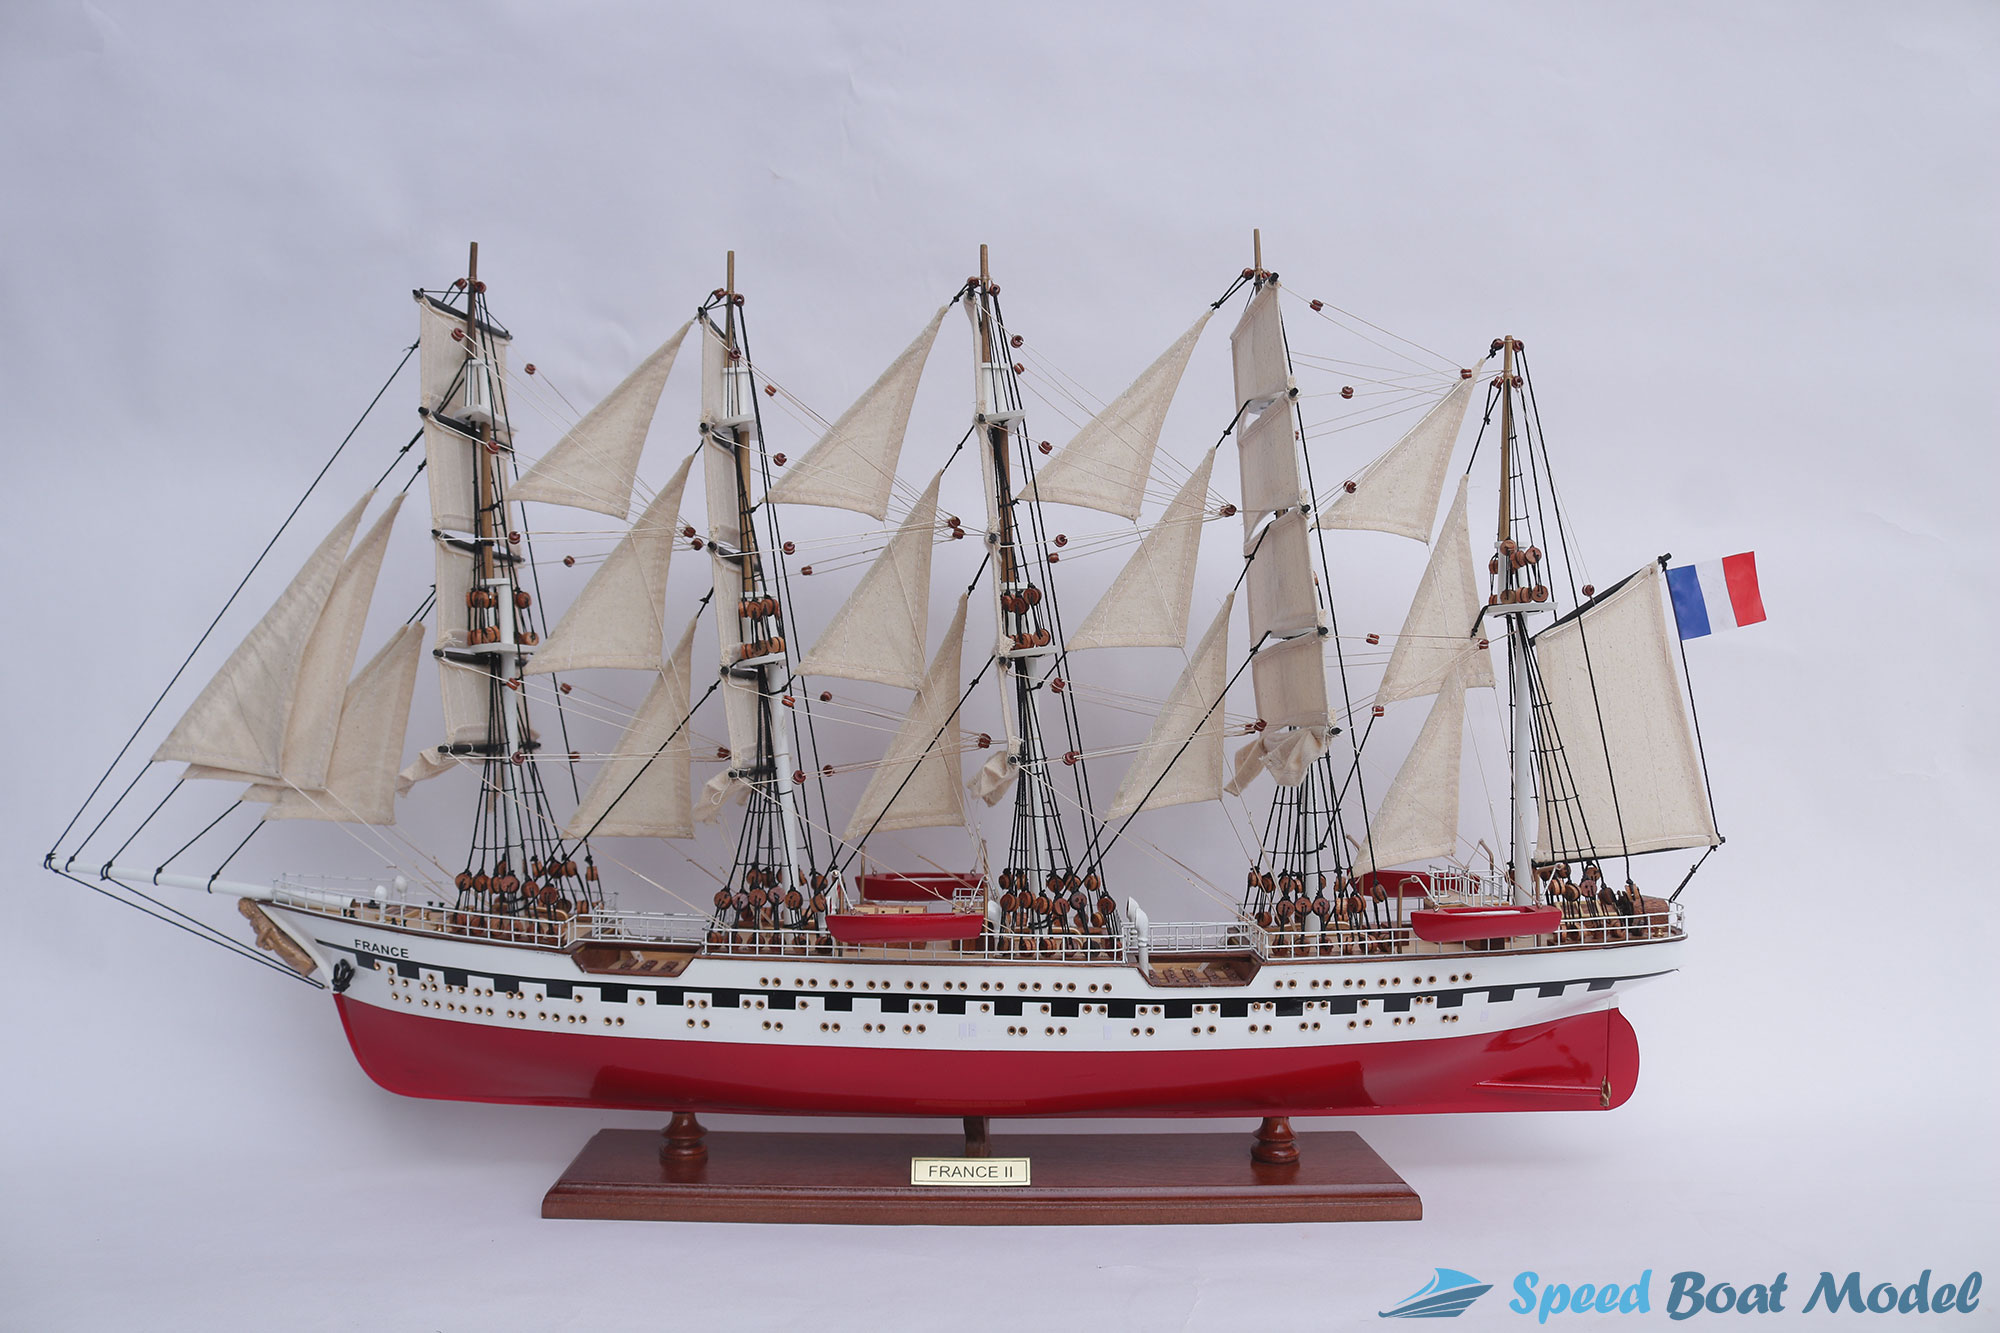 France Ii Painted Tall Ship Model